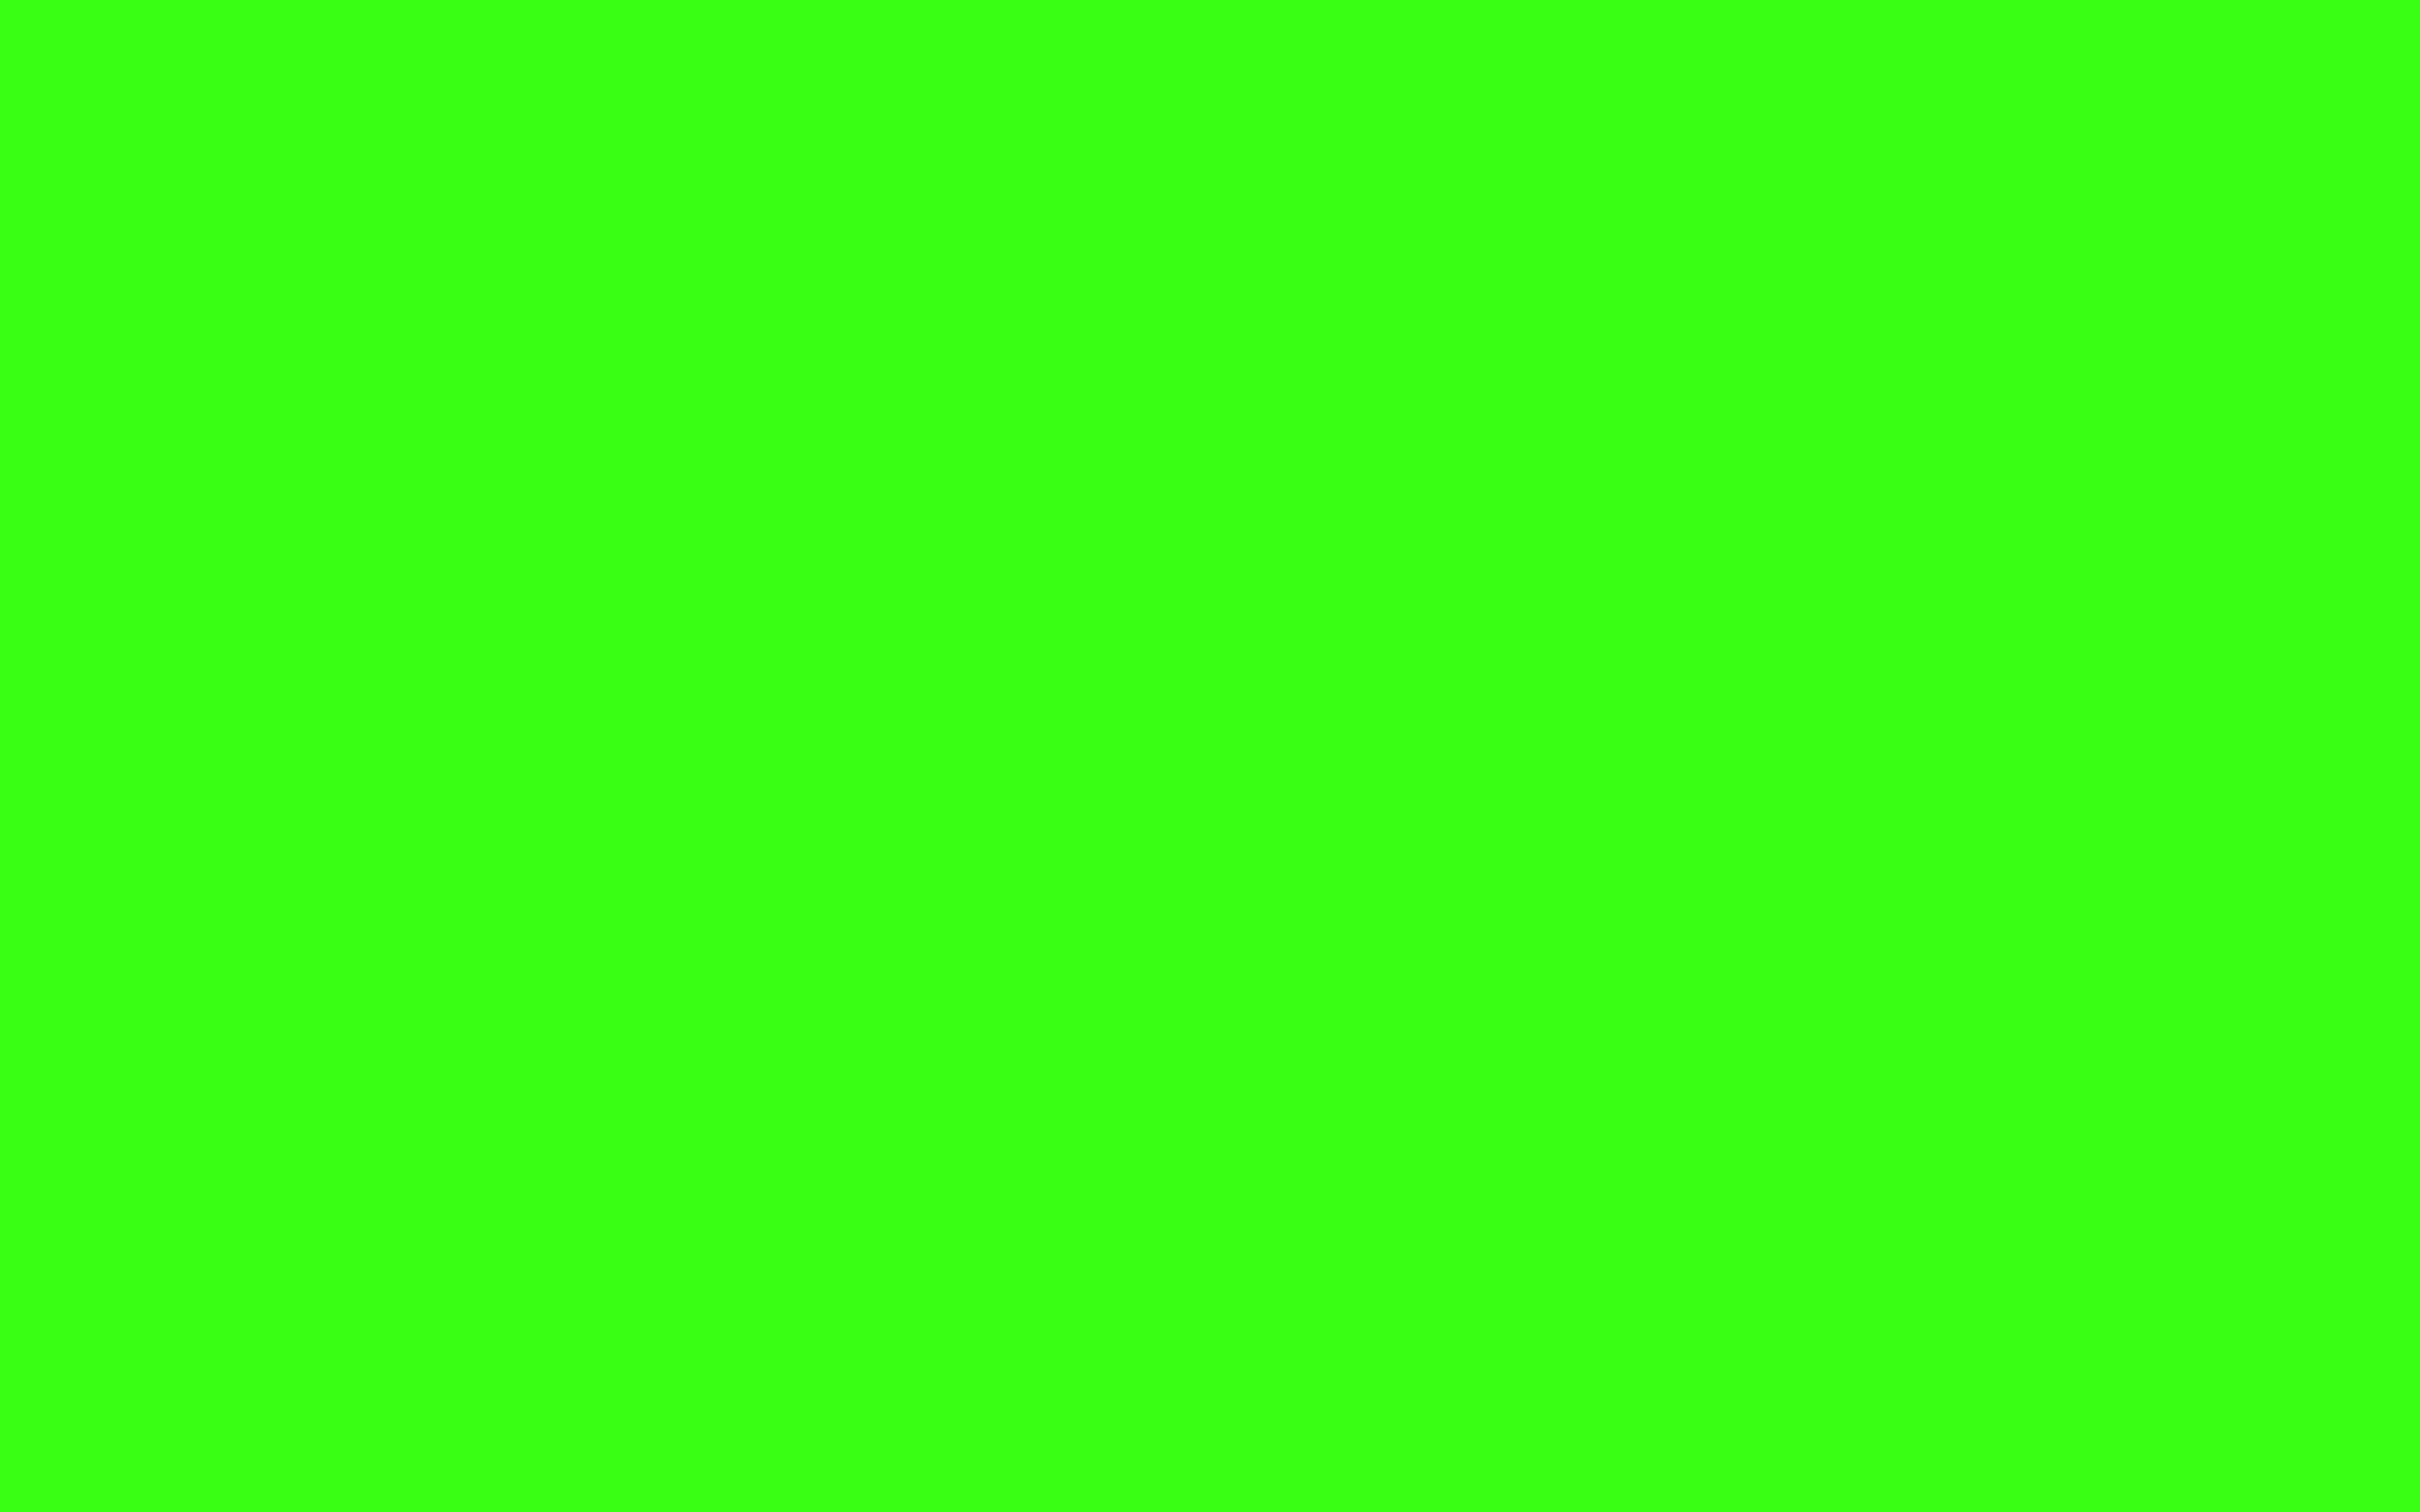 Free 2880x1800 resolution Neon Green solid color background view and